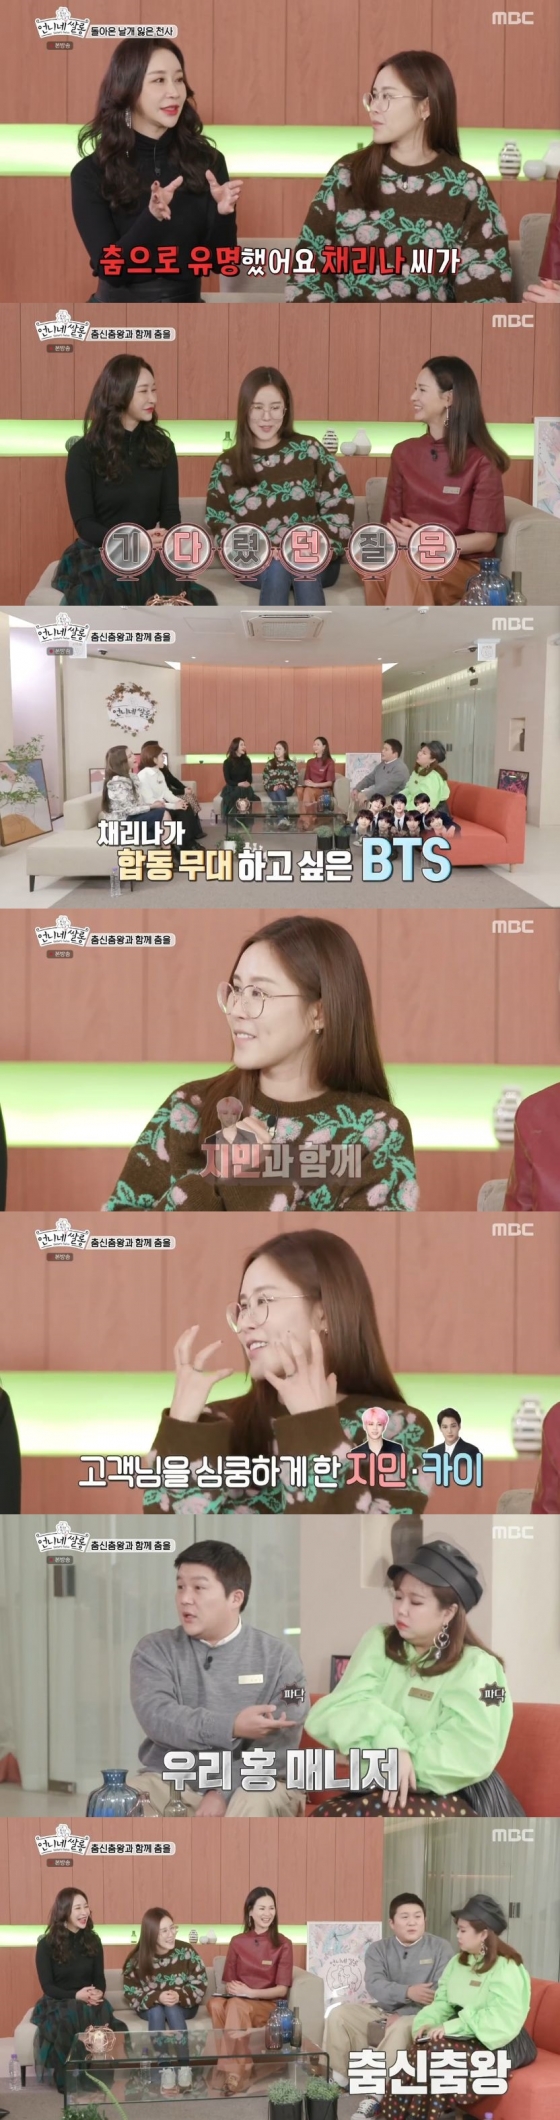 In Sisters Rice Long, Chae Ri-na sent a love call to Jimin of BTS and Kai of EXO.In the MBC entertainment program Sisters Rice Long, which was broadcasted on the afternoon of the 20th, Kim Ji Hyun and Chae Ri-na, who had been wrinkled in the 90s, appeared as guests and showed off their duties.Chae Ri-na of the legendary group Roora of the music industry appeared as a client on the day; Chae Ri-na said, I never wore sexy or such costumes when I was active.I was commissioned to transform myself into a top-goal Sunmi in 2020. Sunmi seems to have a charm of that Friend, but also sexy.I was boldly commissioned to pretend to be crazy and to do Sunmi styling. Chae Ri-na, who appeared with glasses on his face for makeovers, smiled shyly, saying, It is the first time I broadcast this face for 25 years.Kim Ji Hyun, who introduced himself as a family-like best friend, said, I was famous for dancing.I was famous and I joined Roora because Kang Won-rae introduced me. Chae Ri-na said, I have been living in the music industry for a long time, but nowadays I have a junior who wants to share the joint stage with friends.Jo Se-ho asked, What kind of junior is it? Chae Ri-na said, Ill ask you quickly. I have a team I love.I like it all, but I am interested in dancing again, Mr. Jimin. And Mr. Kai of EXO. They are now full of my eyes. At this time, Jo Se-ho pointed to Hong Hyun-hee, saying, I know a dancer who is hiding.So Hong Hyun-hee jumped up and danced, and then danced with Chae Ri-na to No Secrets.Meanwhile, Kim Ji Hyun said, I do not eat after 6 oclock, Chae Ri-na said.Jo Se-ho then laughed, saying, I feel like I have never eaten since 6 oclock in my life.Since then, Chae Ri-na has made perfect makeovers through Han Hye-yeons styling room, Lees make-up room, and Cha Hongs hair room.